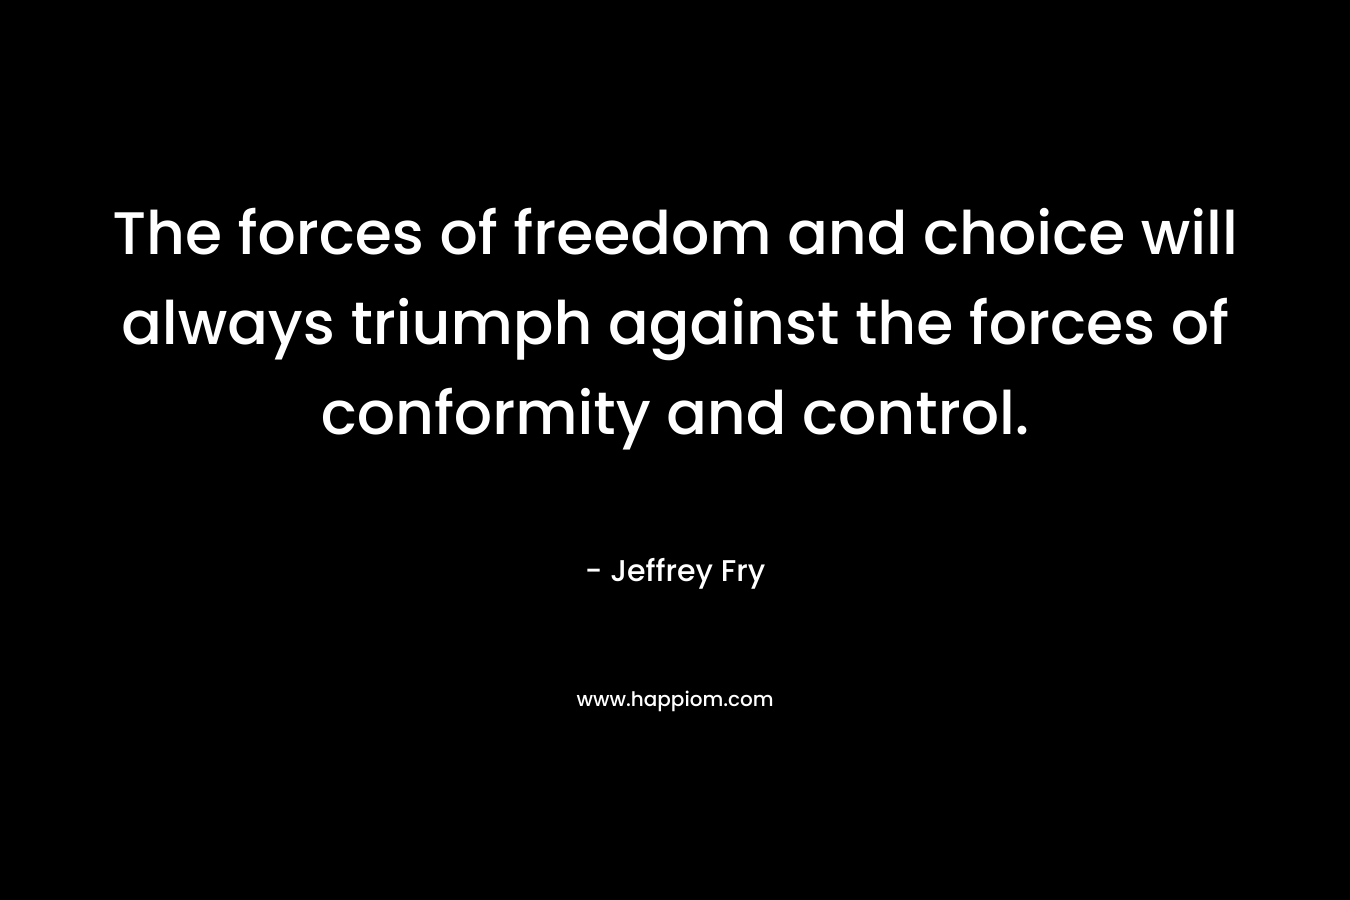 The forces of freedom and choice will always triumph against the forces of conformity and control.